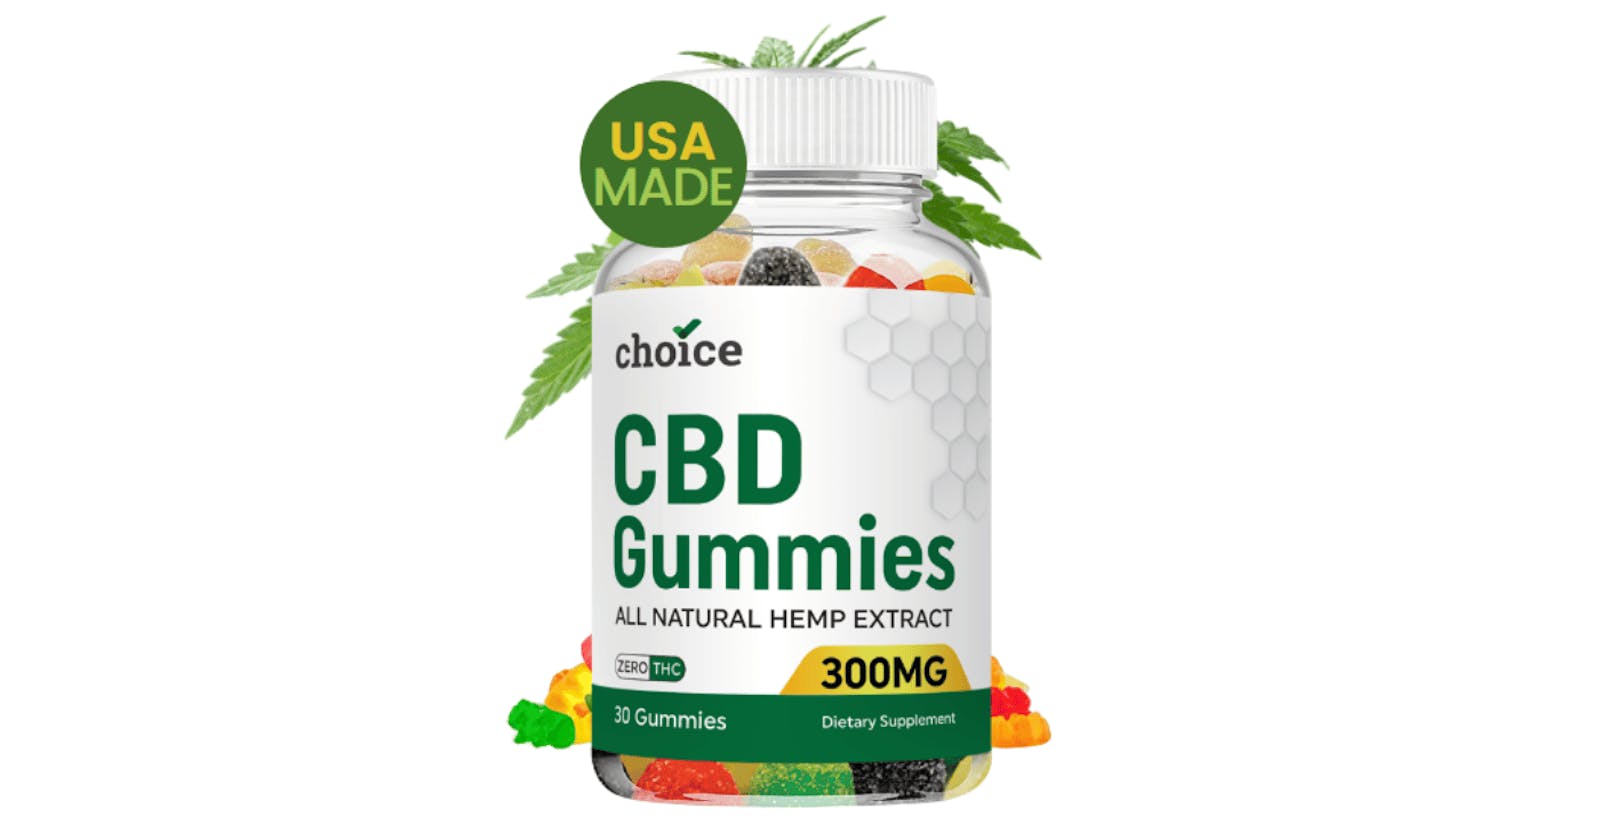 Vidapur CBD Gummies - What are Customers Saying? Critical Research!